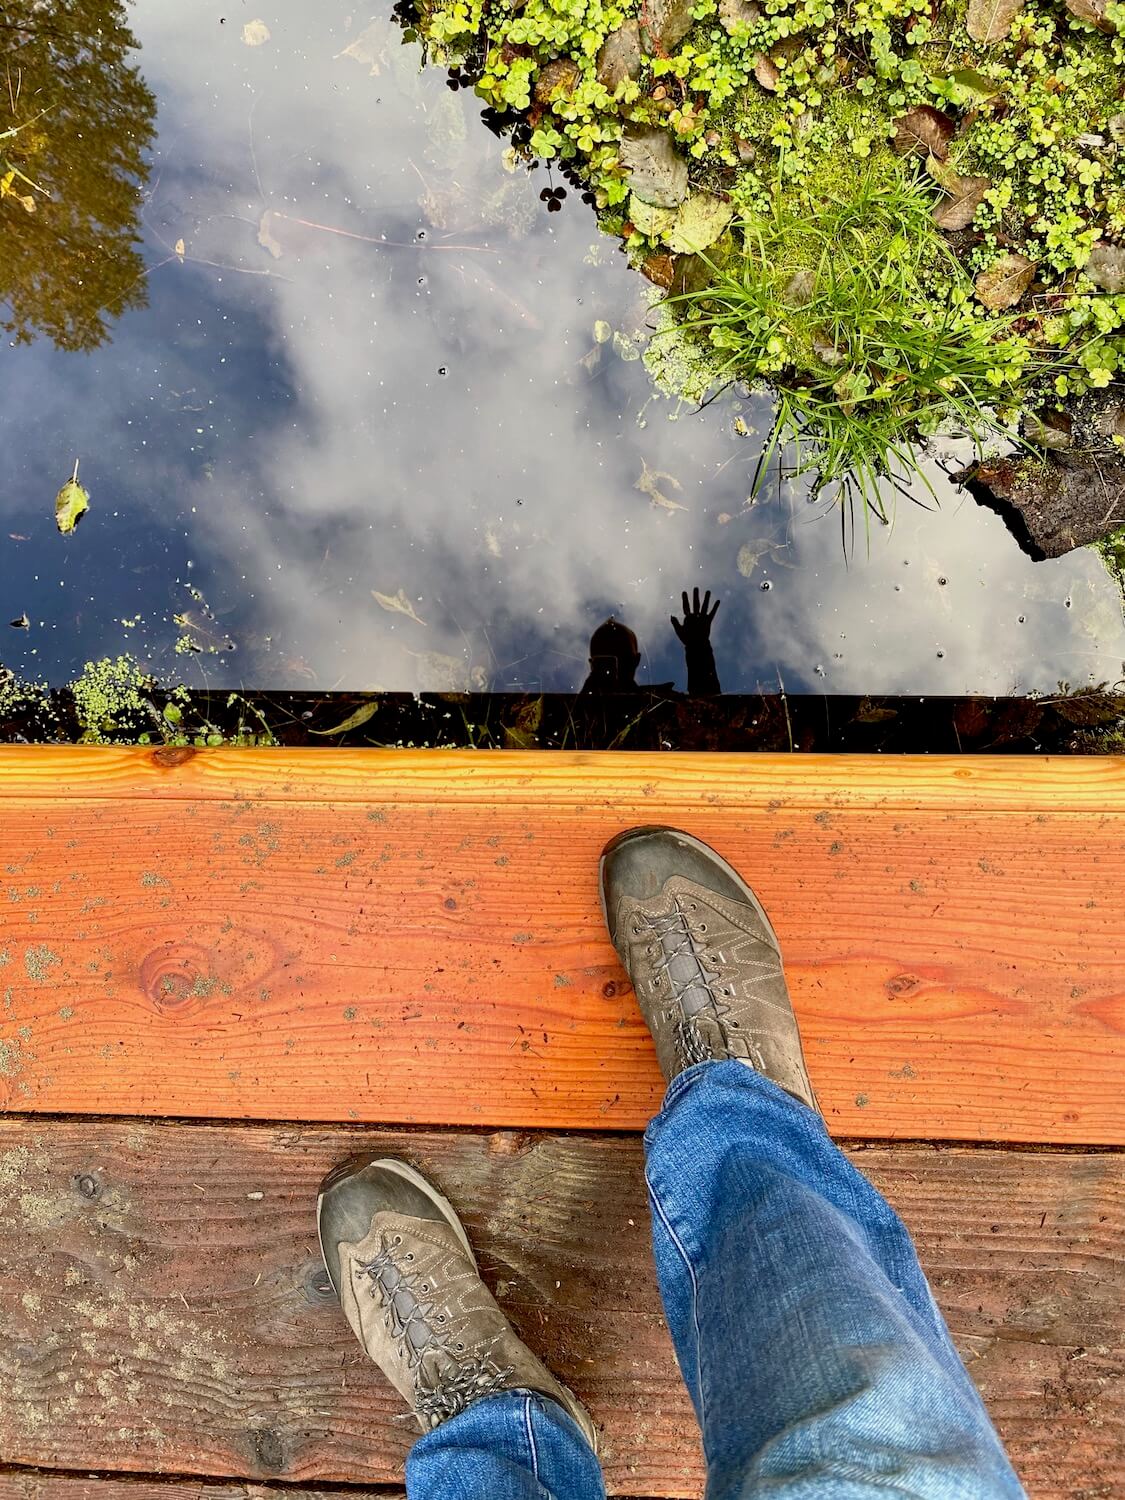 Matthew Kessi stands on golden brown wood boards that make up a boardwalk. He peers over the edge and waves his hand, which is reflected in the black murky water below. He is wearing hiking shoes that can be seen as well as jeans. There is a patch of green water plants in one corner.